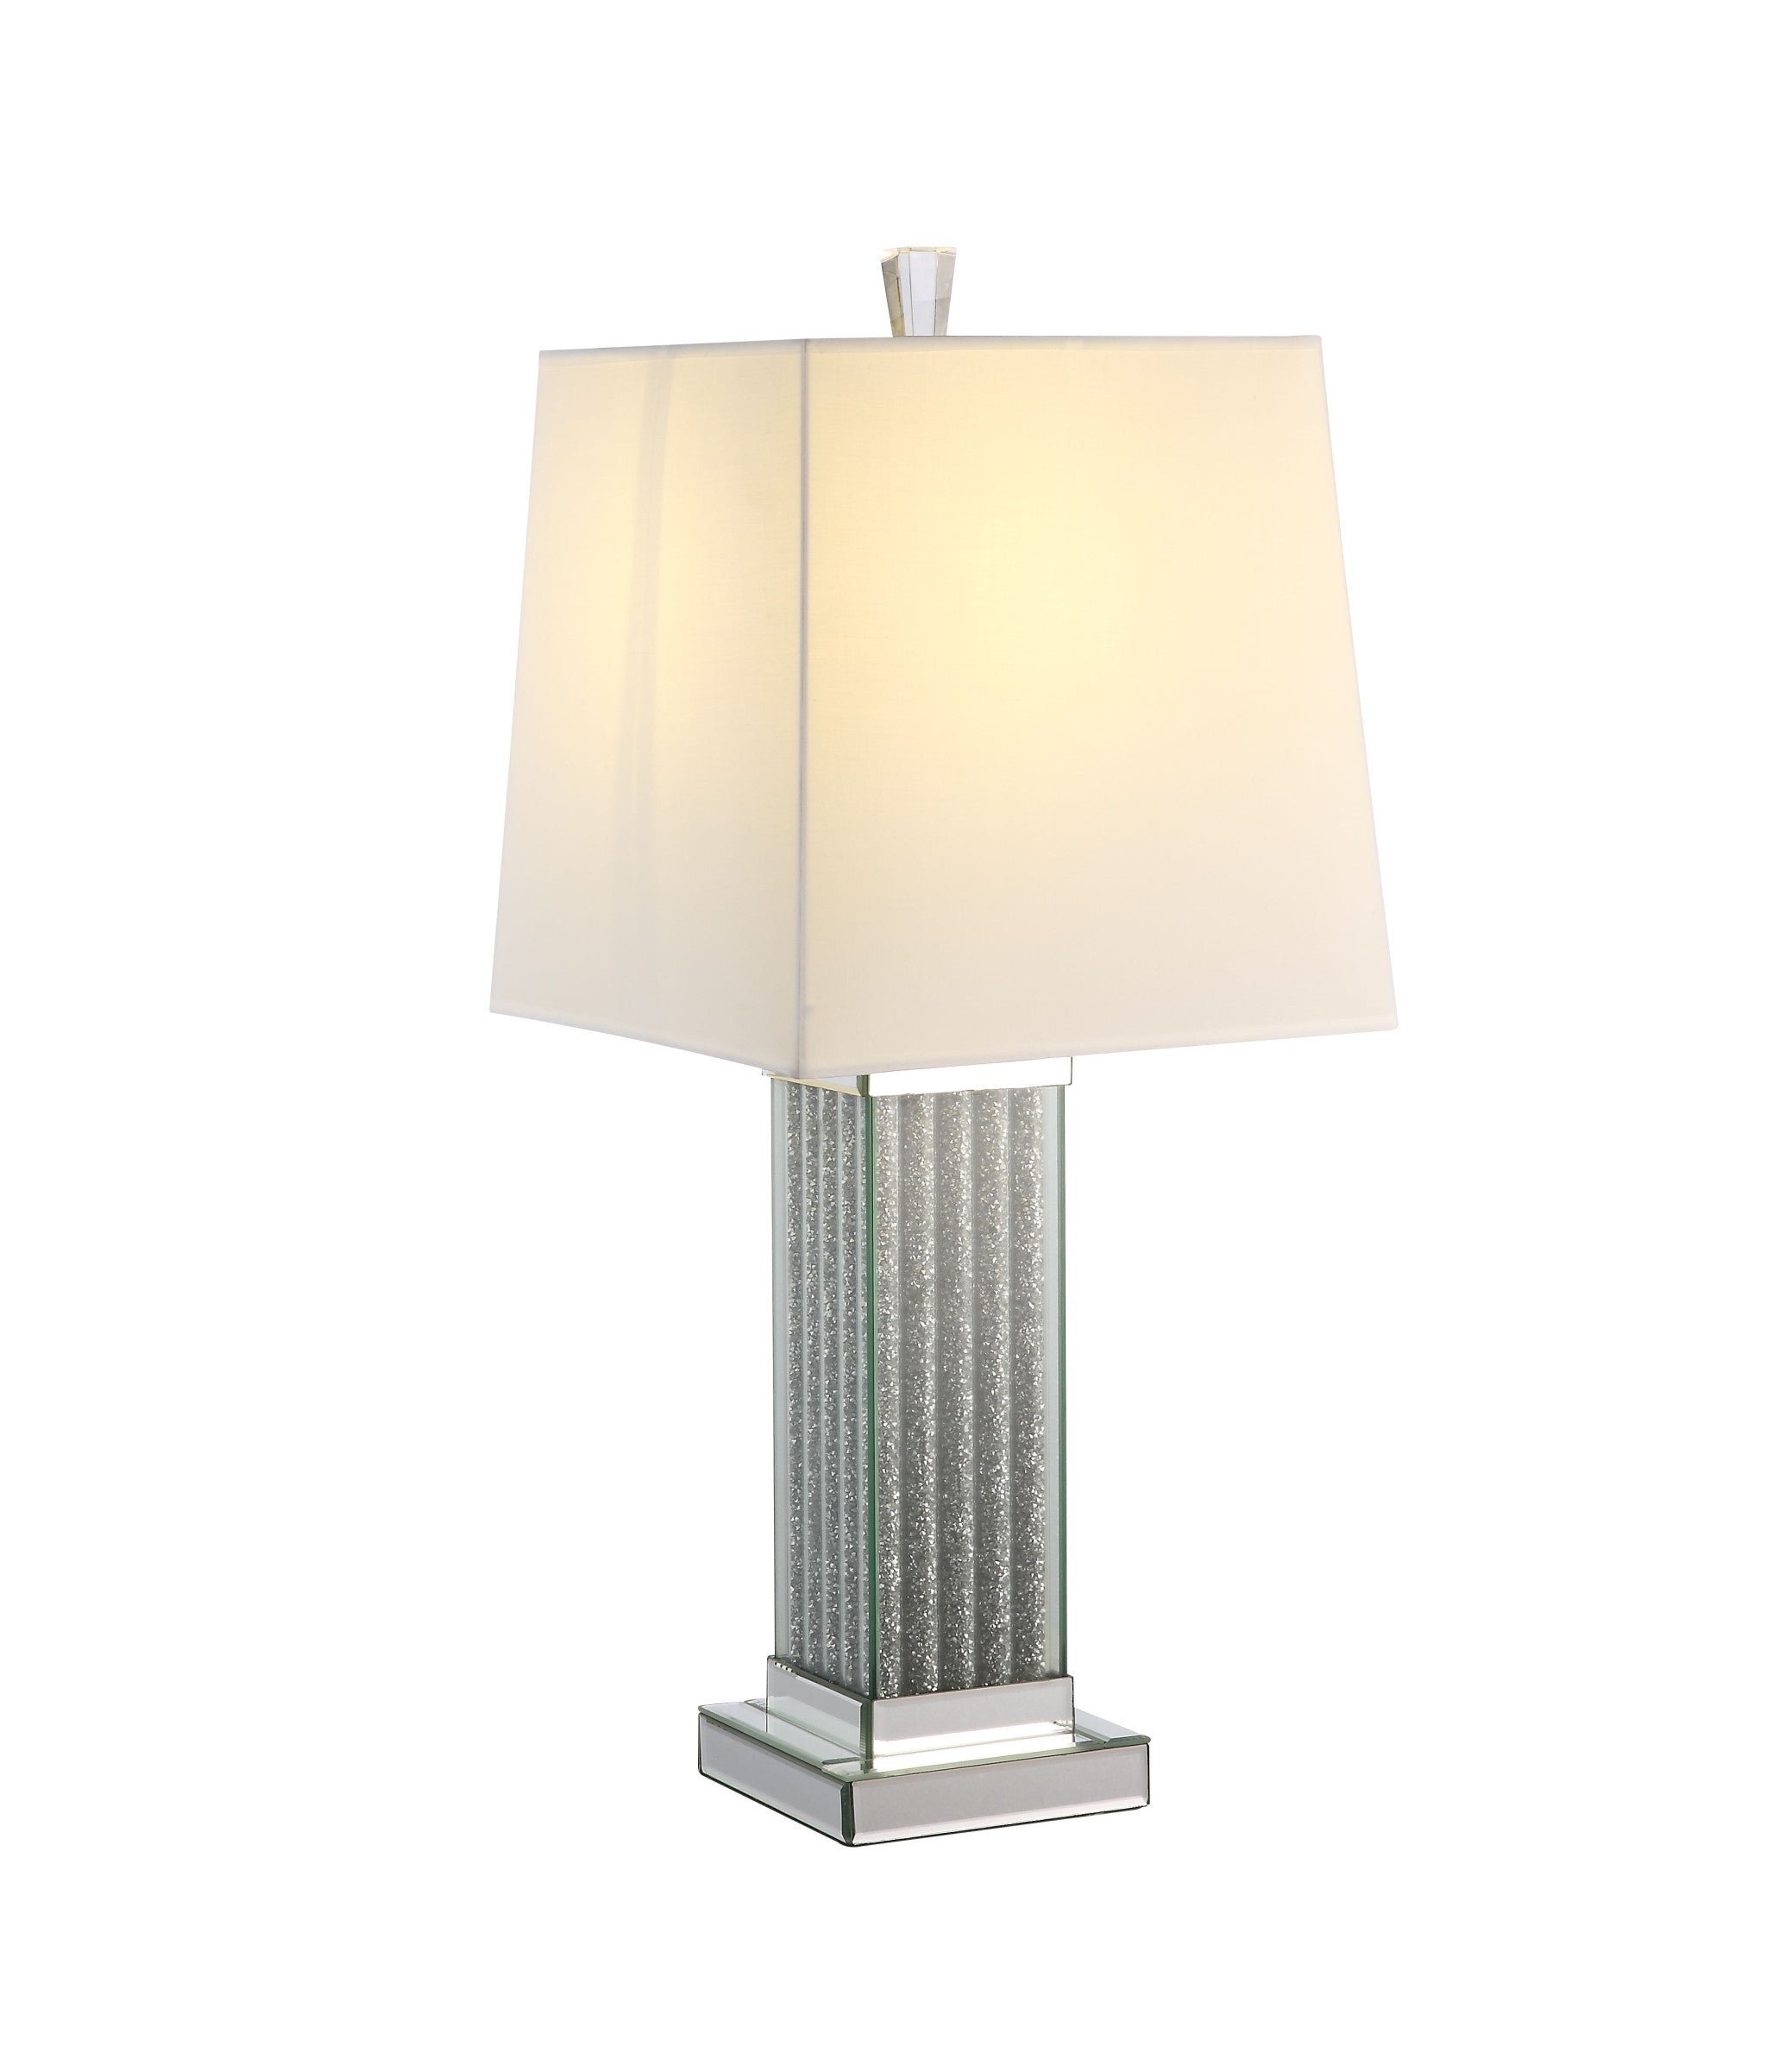 30" Mirrored Glass and Faux Stone Column Table Lamp With White Square Shade